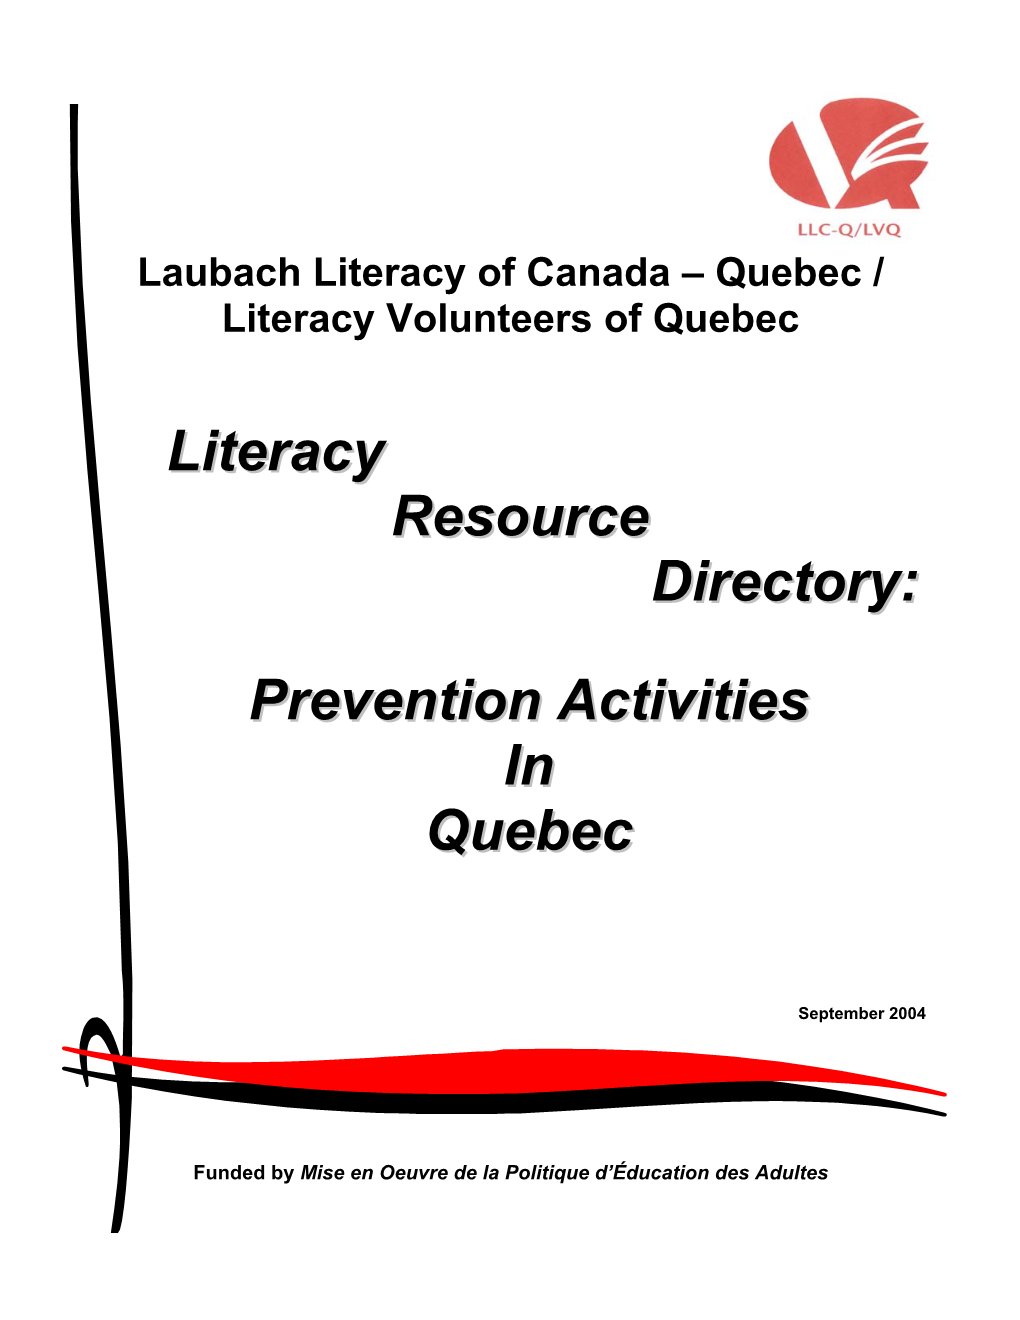 Laubach Literacy of Canada – Quebec/Literacy Volunteers Of